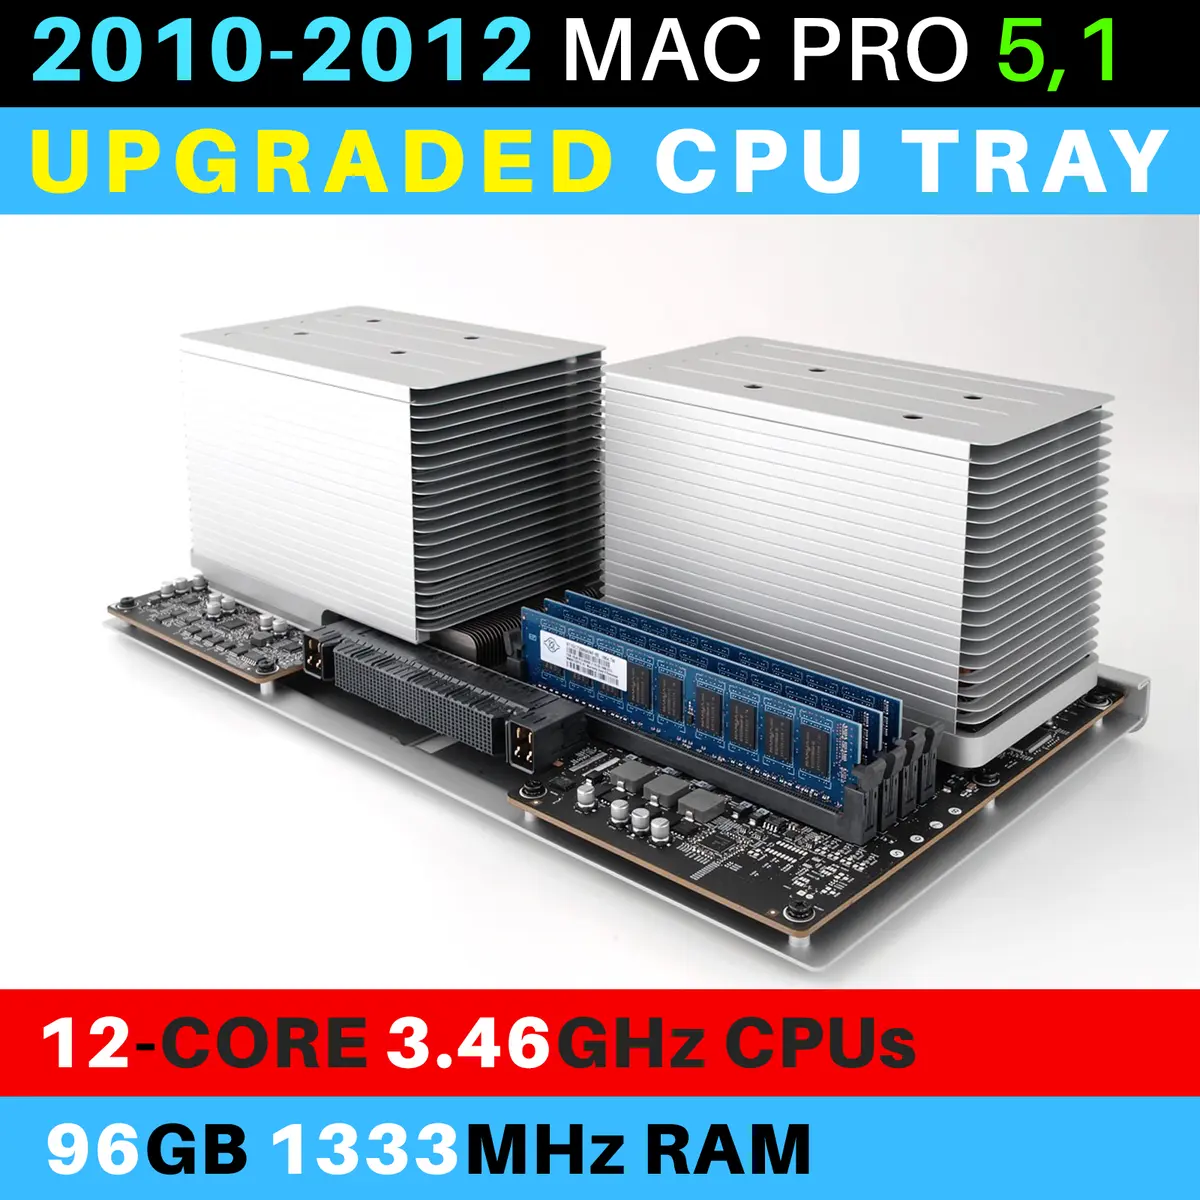 2010-2012  Mac Pro 5,1 CPU with 12-Core 3.46GHz and 96GB RAM | eBay